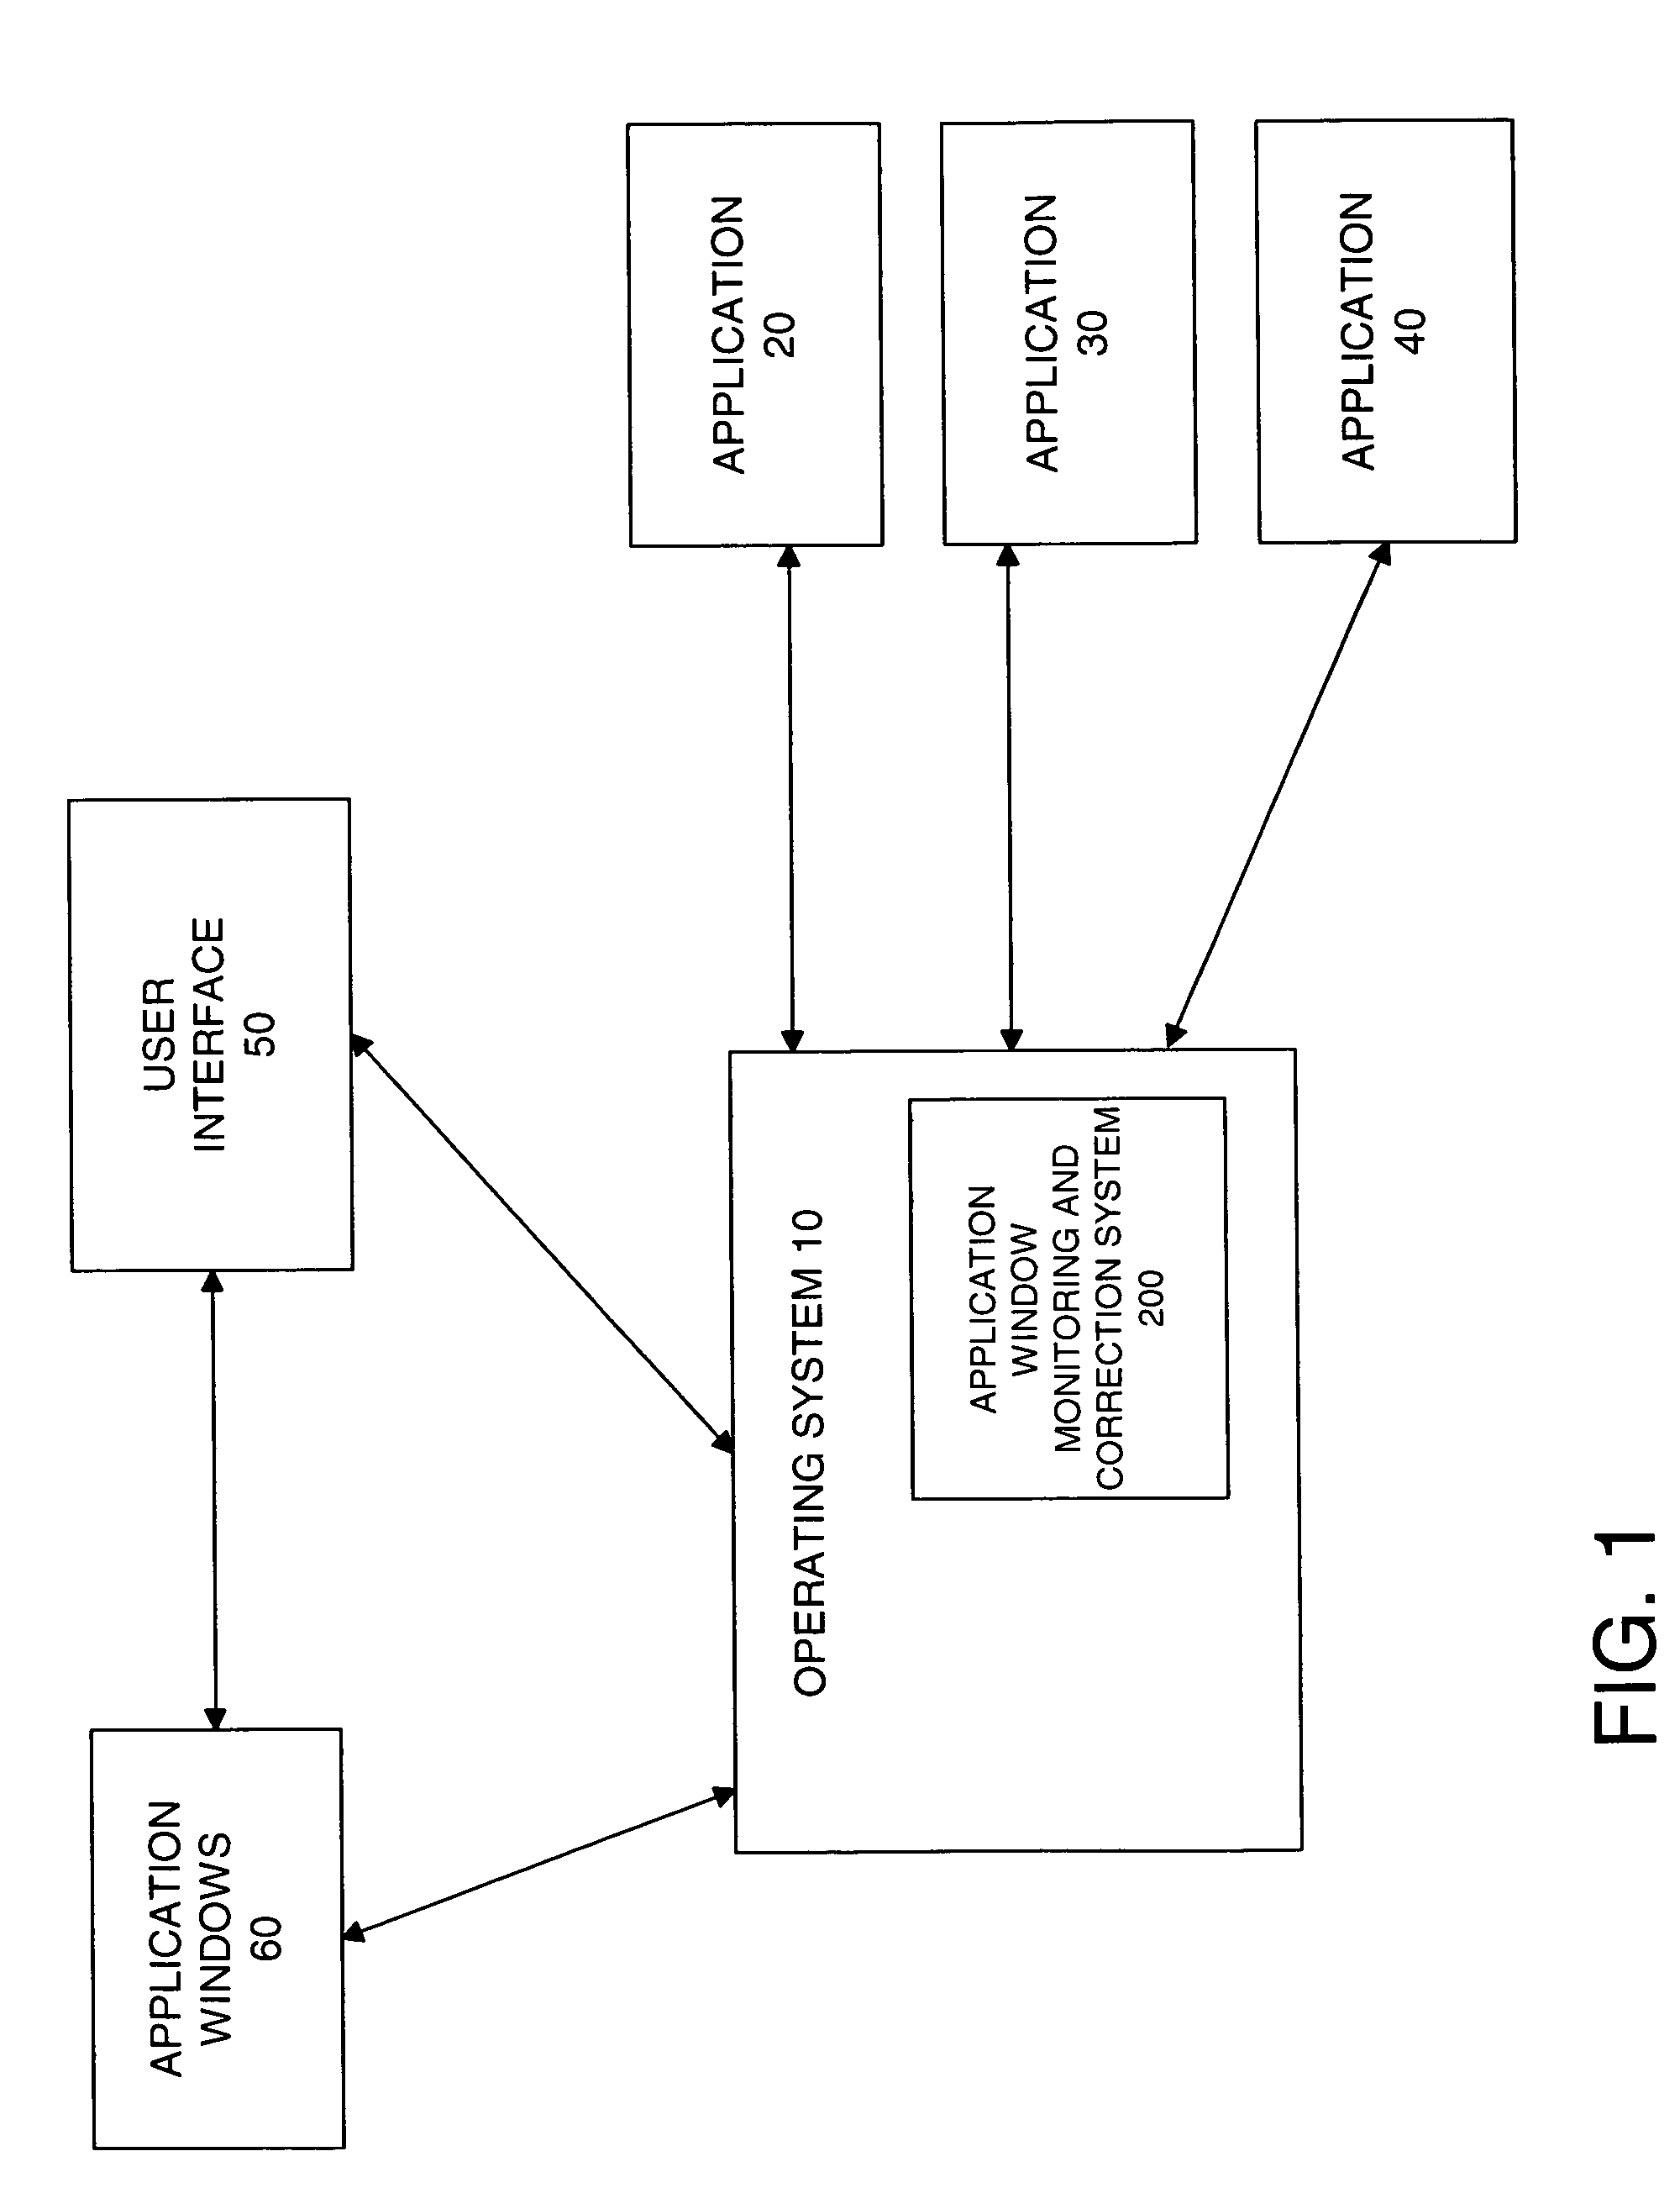 System and method for monitoring application response and providing visual treatment